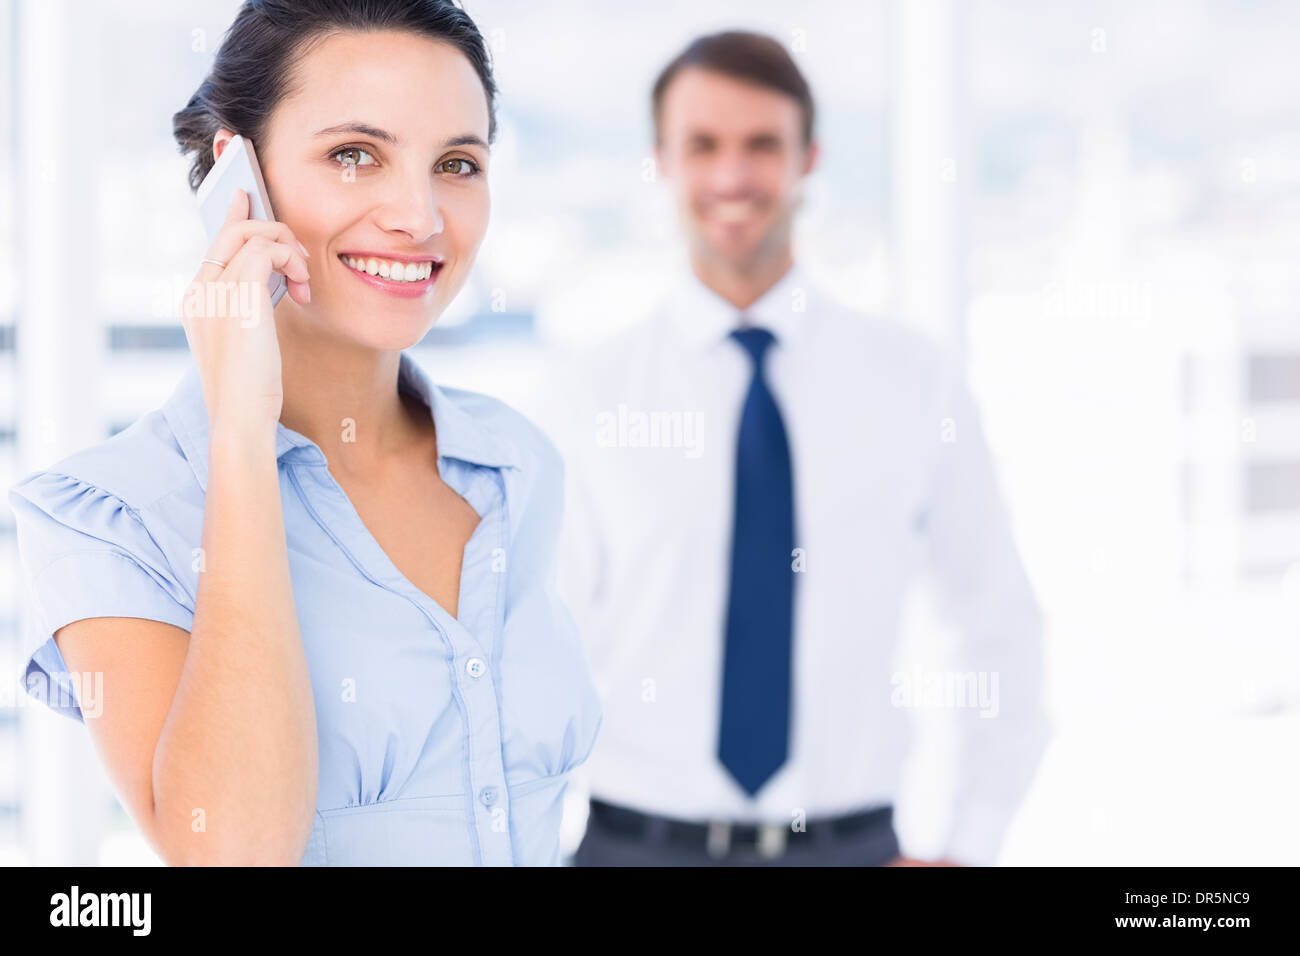 Woman on call with male colleague in background Stock Photo